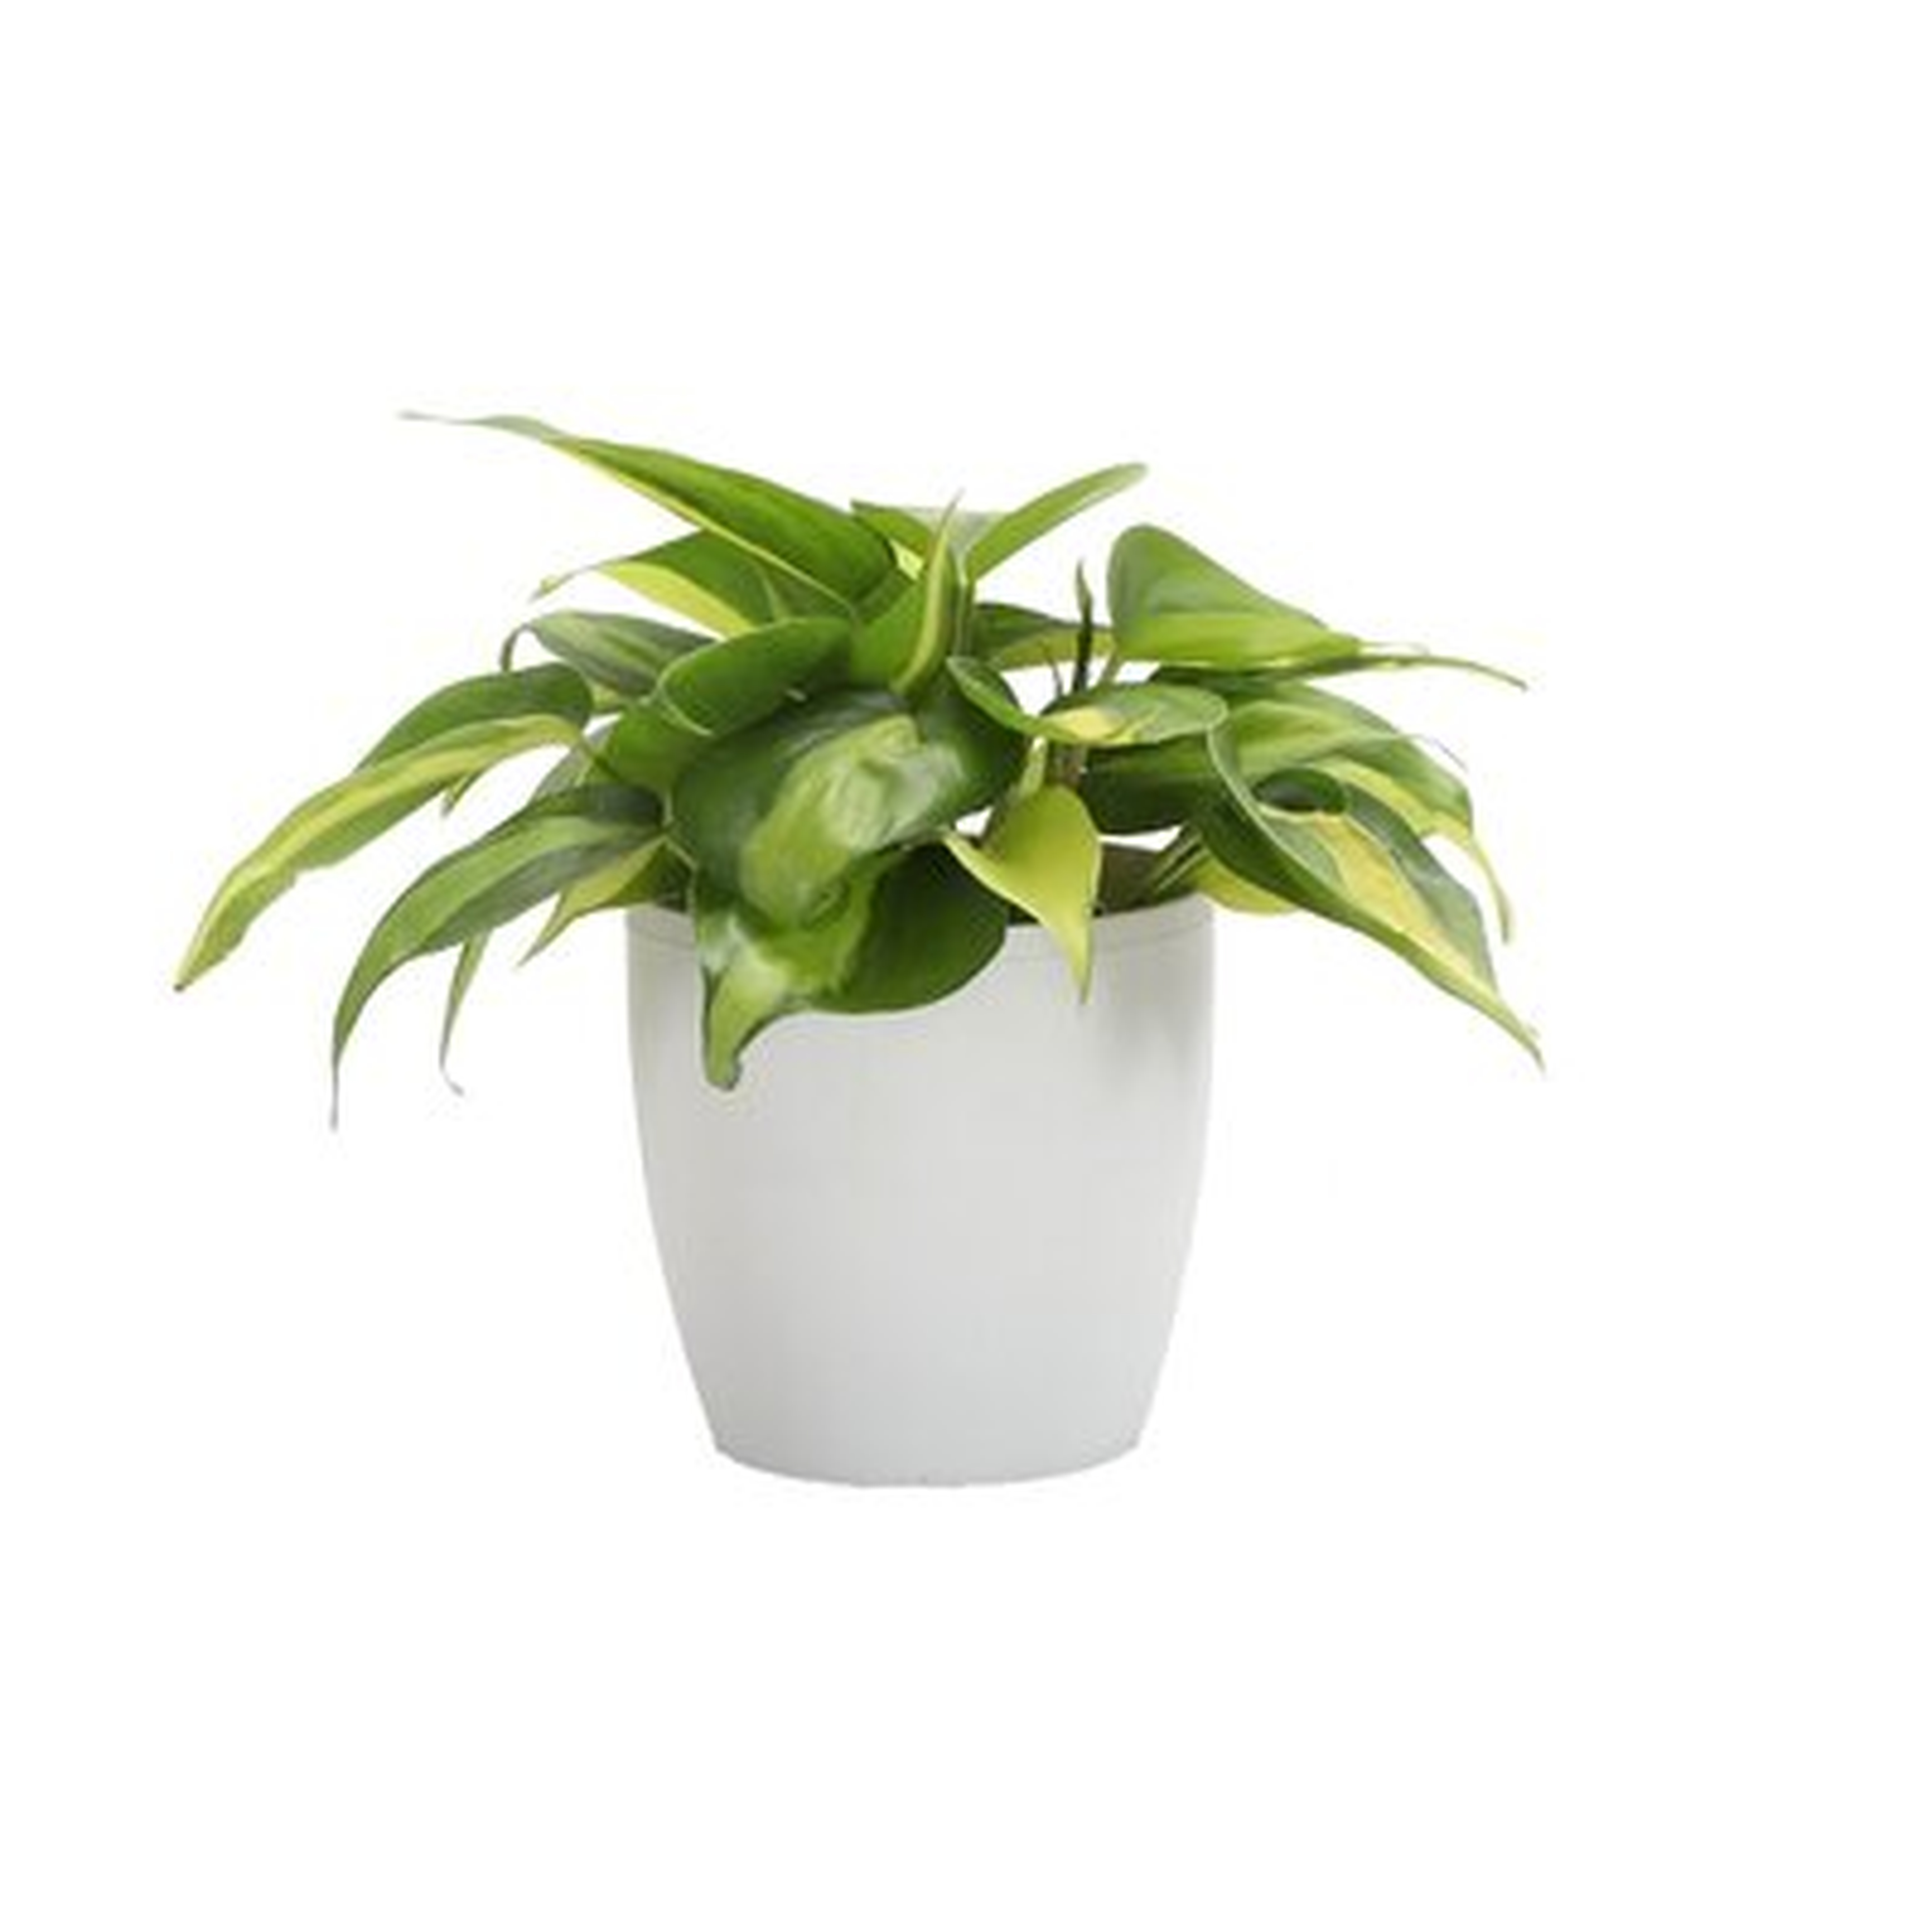 4" Live Philodendron Plant in Pot - Wayfair